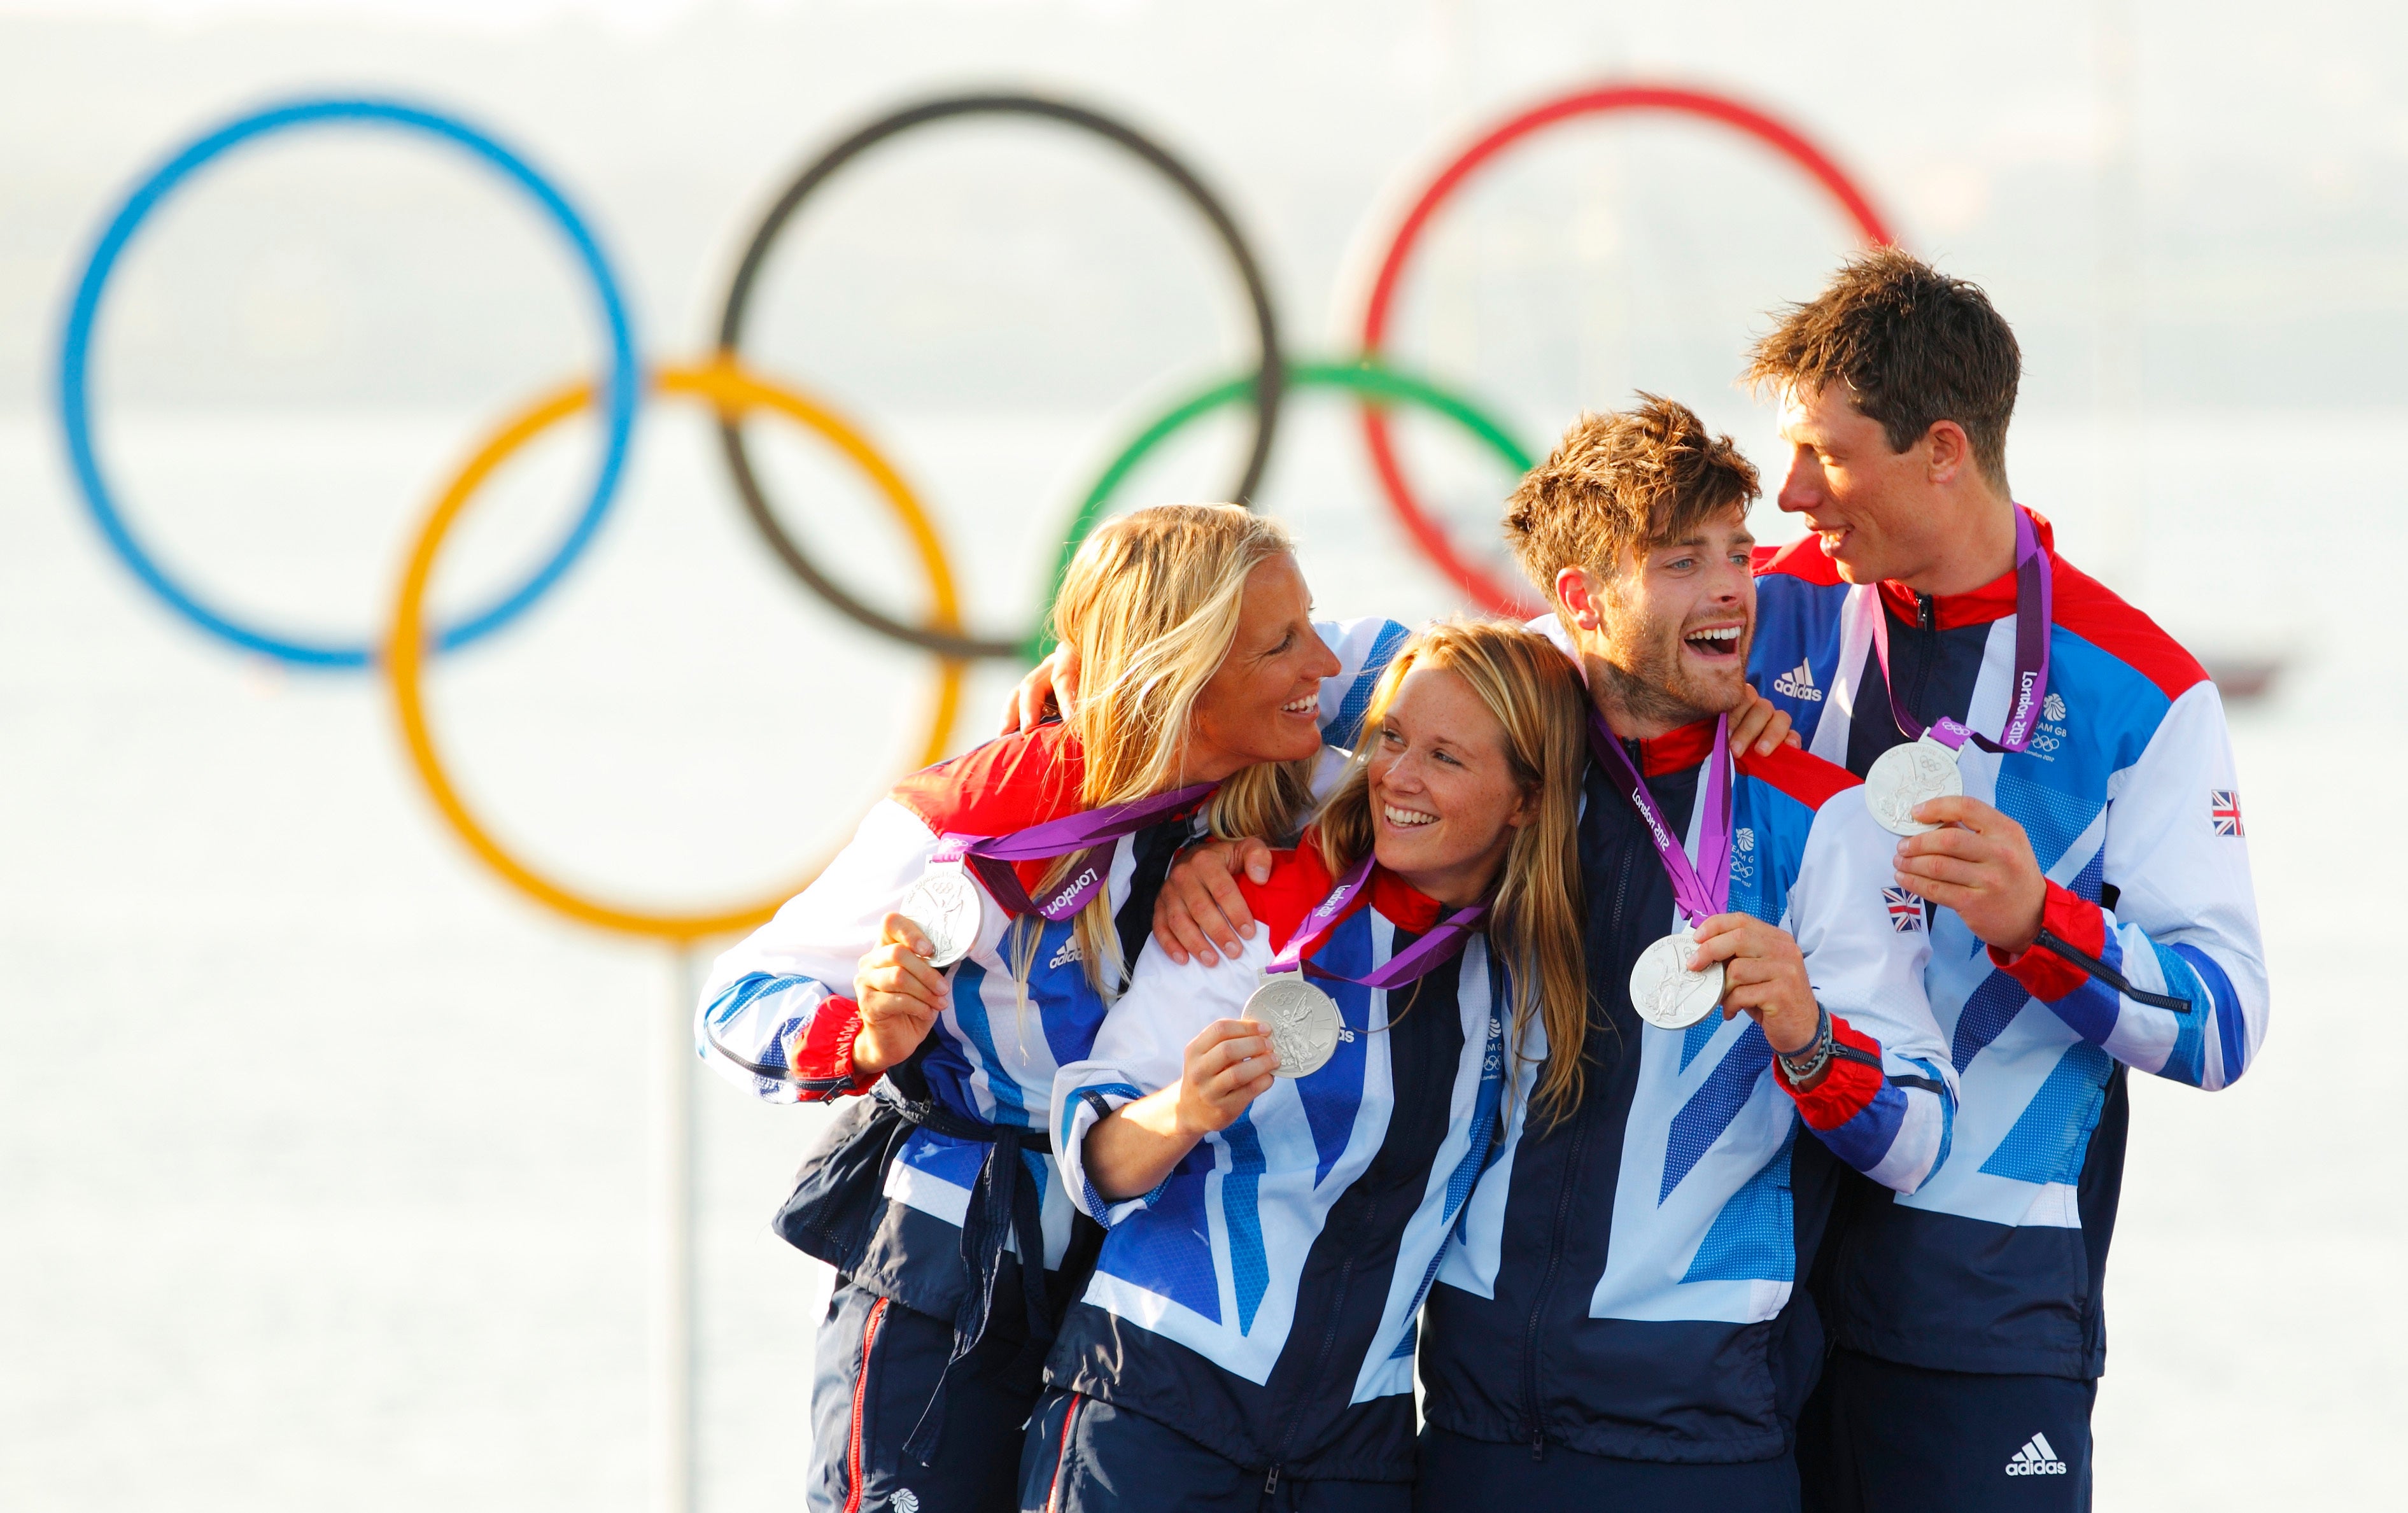 Hannah Mills and Saskia Clark (far left) won women’s 470 class sailing silver as did Luke Patience and Stuart Bithell (far right) in the men’s event (Chris Ison/PA)